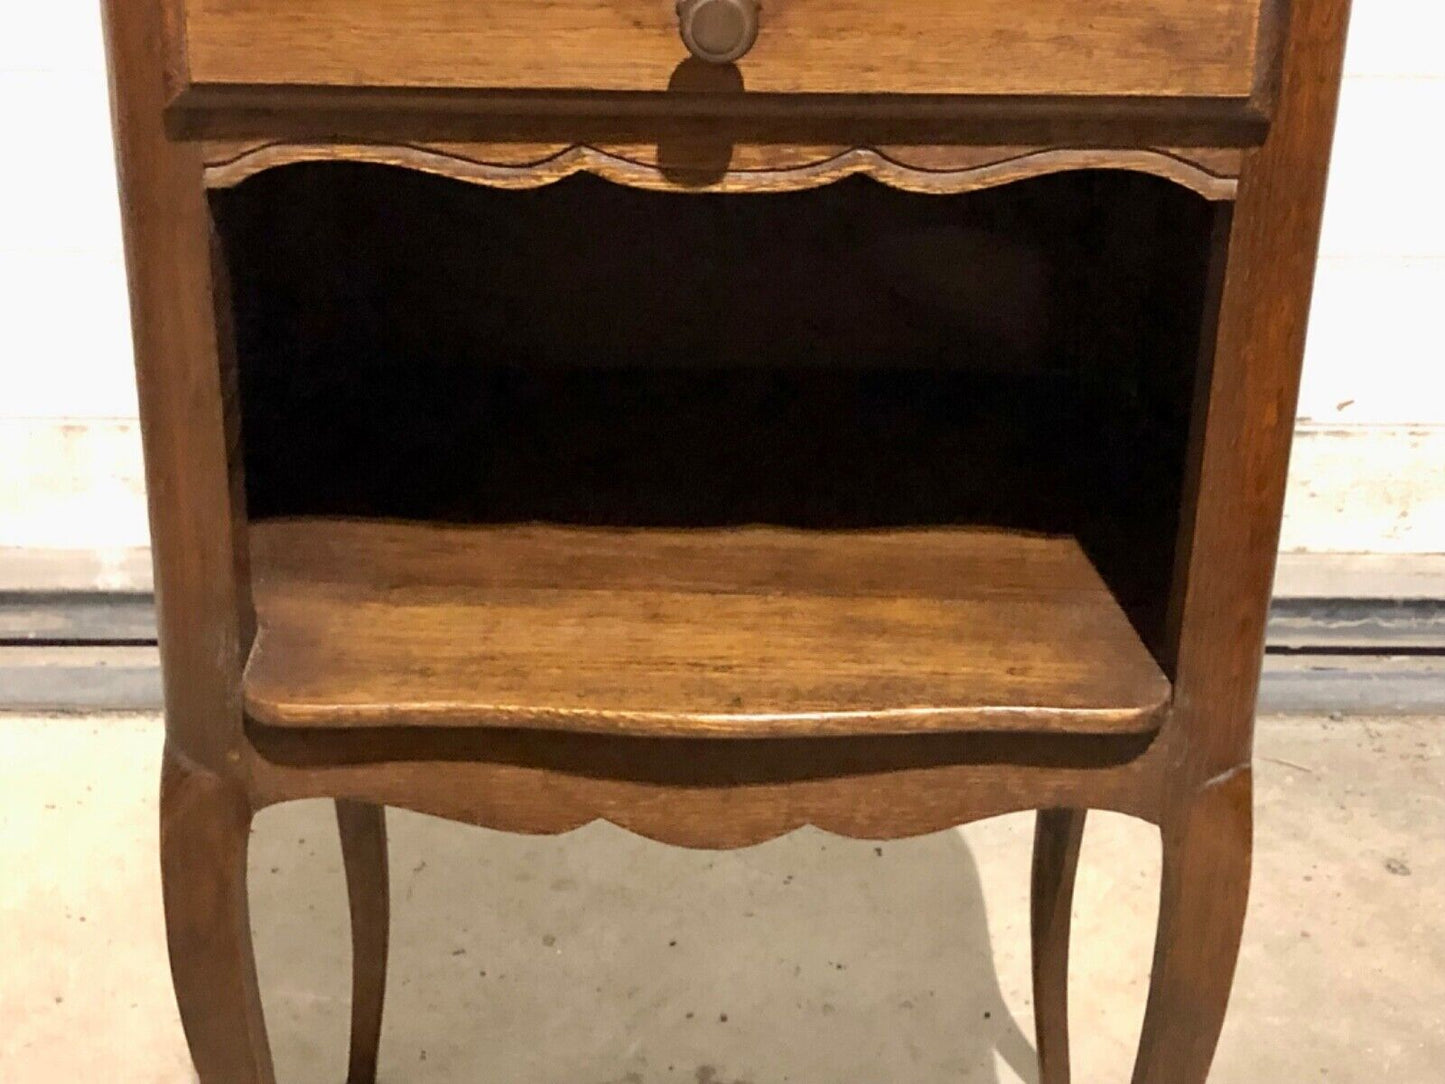 000766....Handsome Pair Of Antique French Oak Bedside Tables / Nightstands( sold )